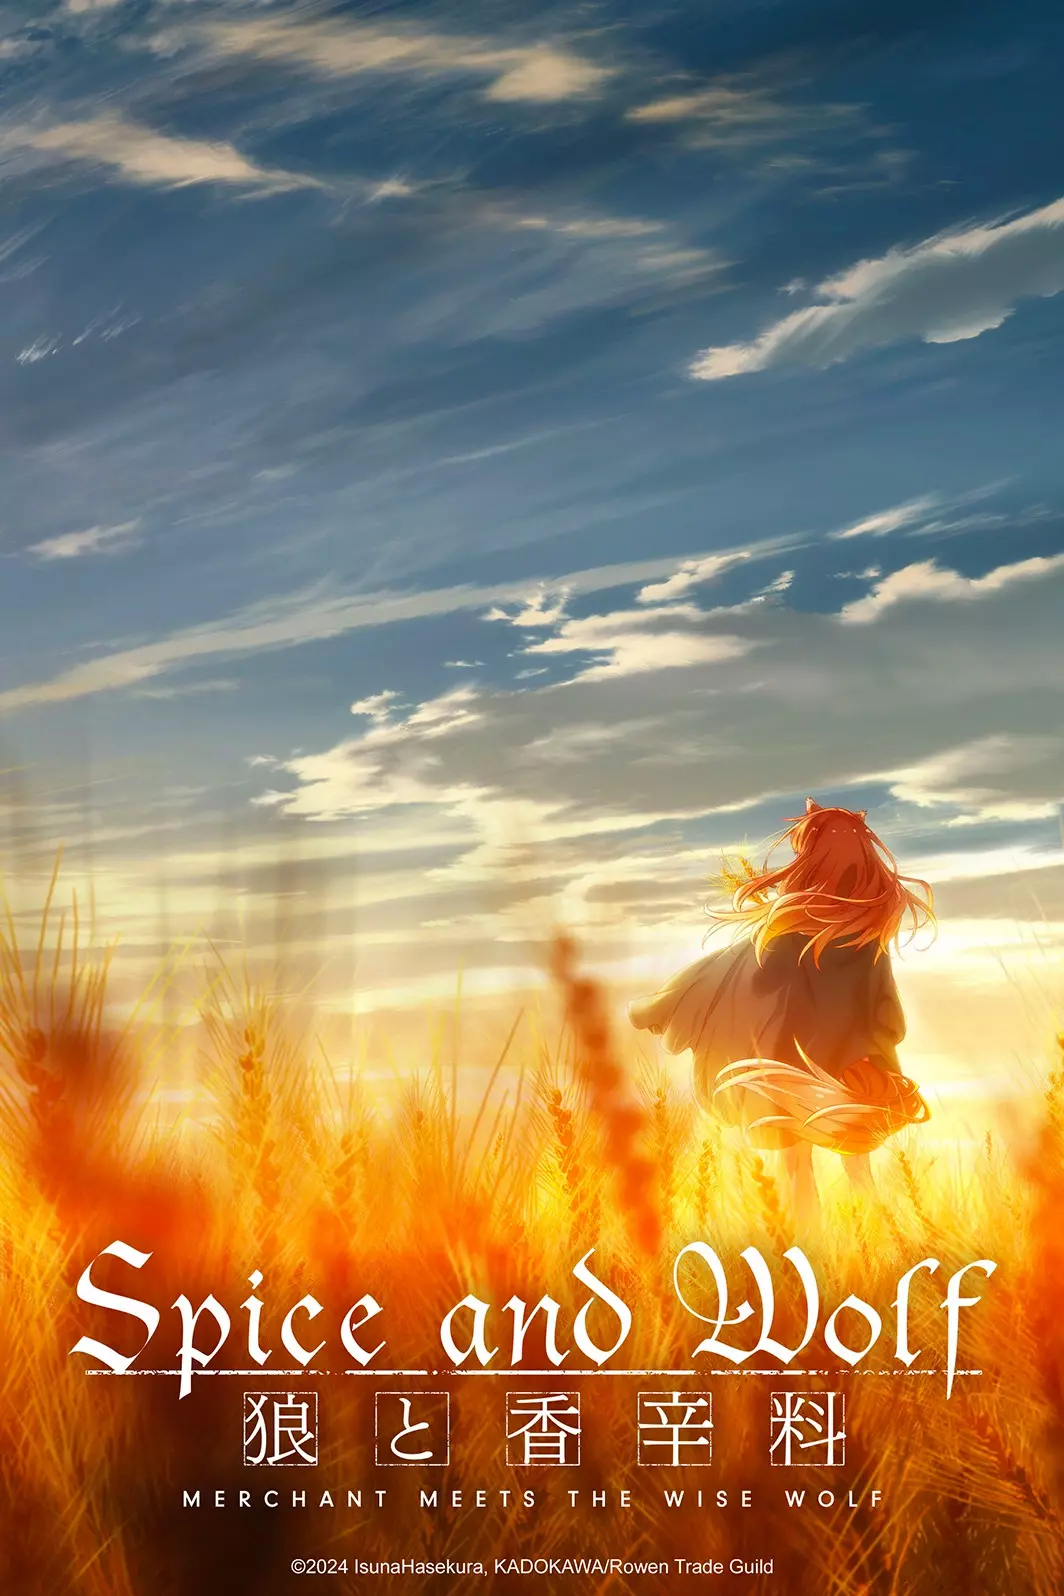 Spice and Wolf - Merchant meets the wise wolf